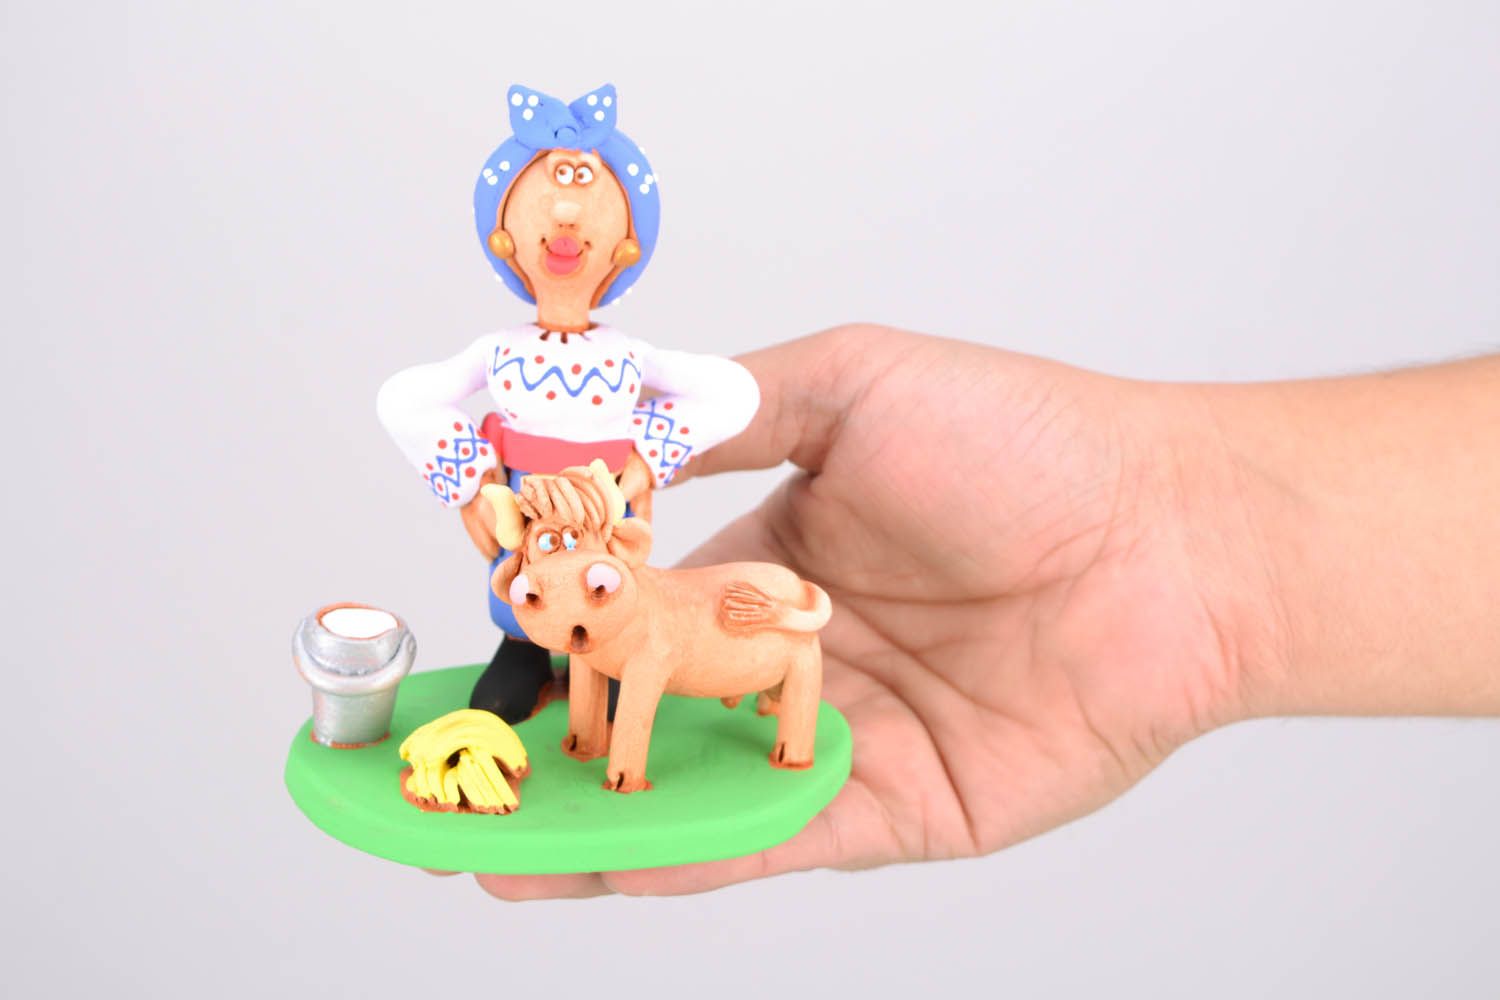 Homemade ceramic figurine The Cossack Woman Milking a Cow photo 2